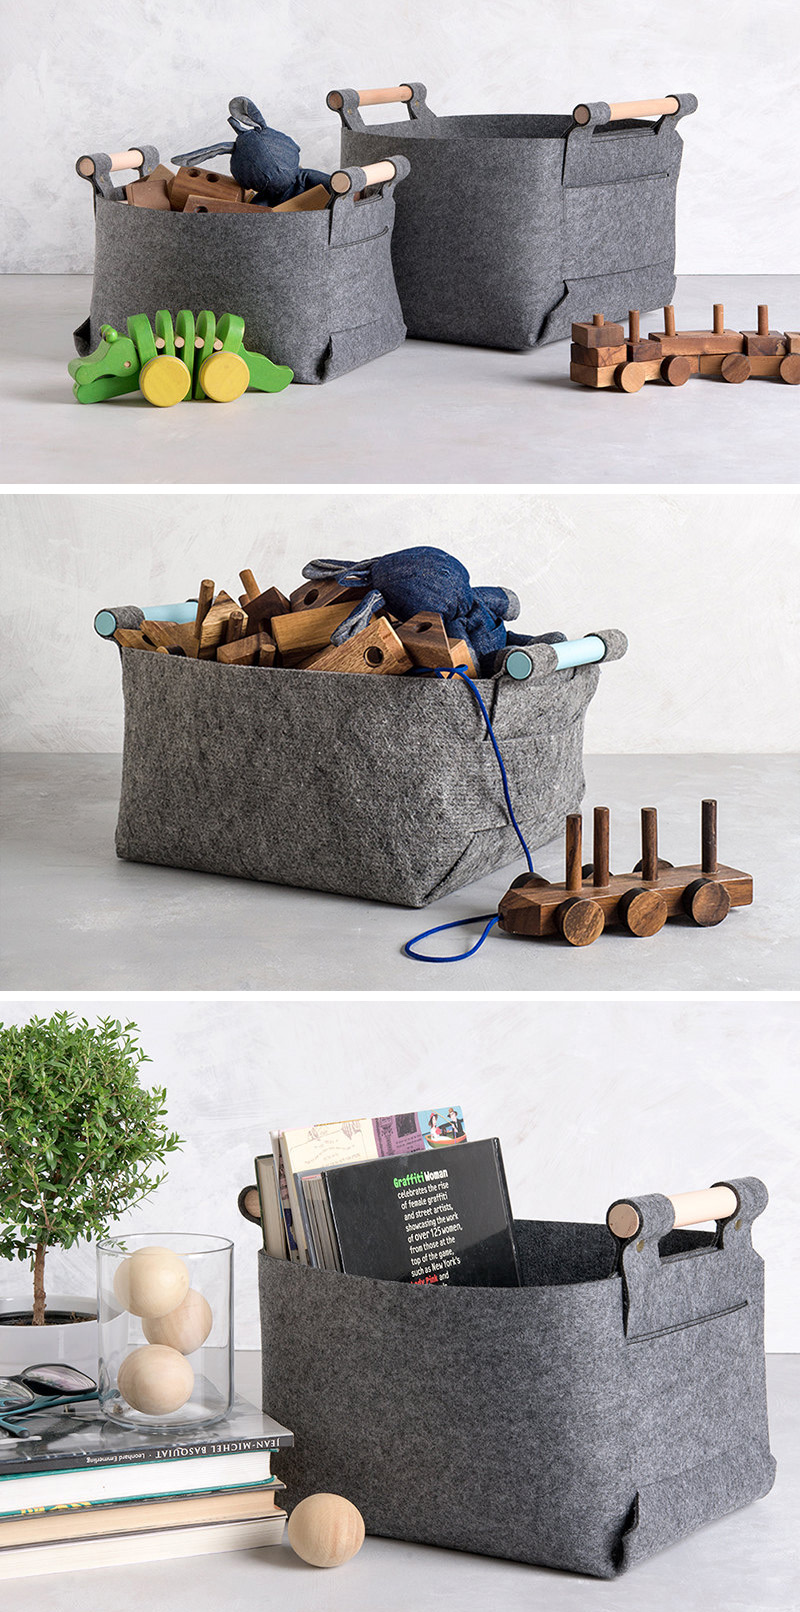 The sturdy form of these modern, grey felt storage baskets means they can hold anything and everything from books and magazines, to blocks and toys